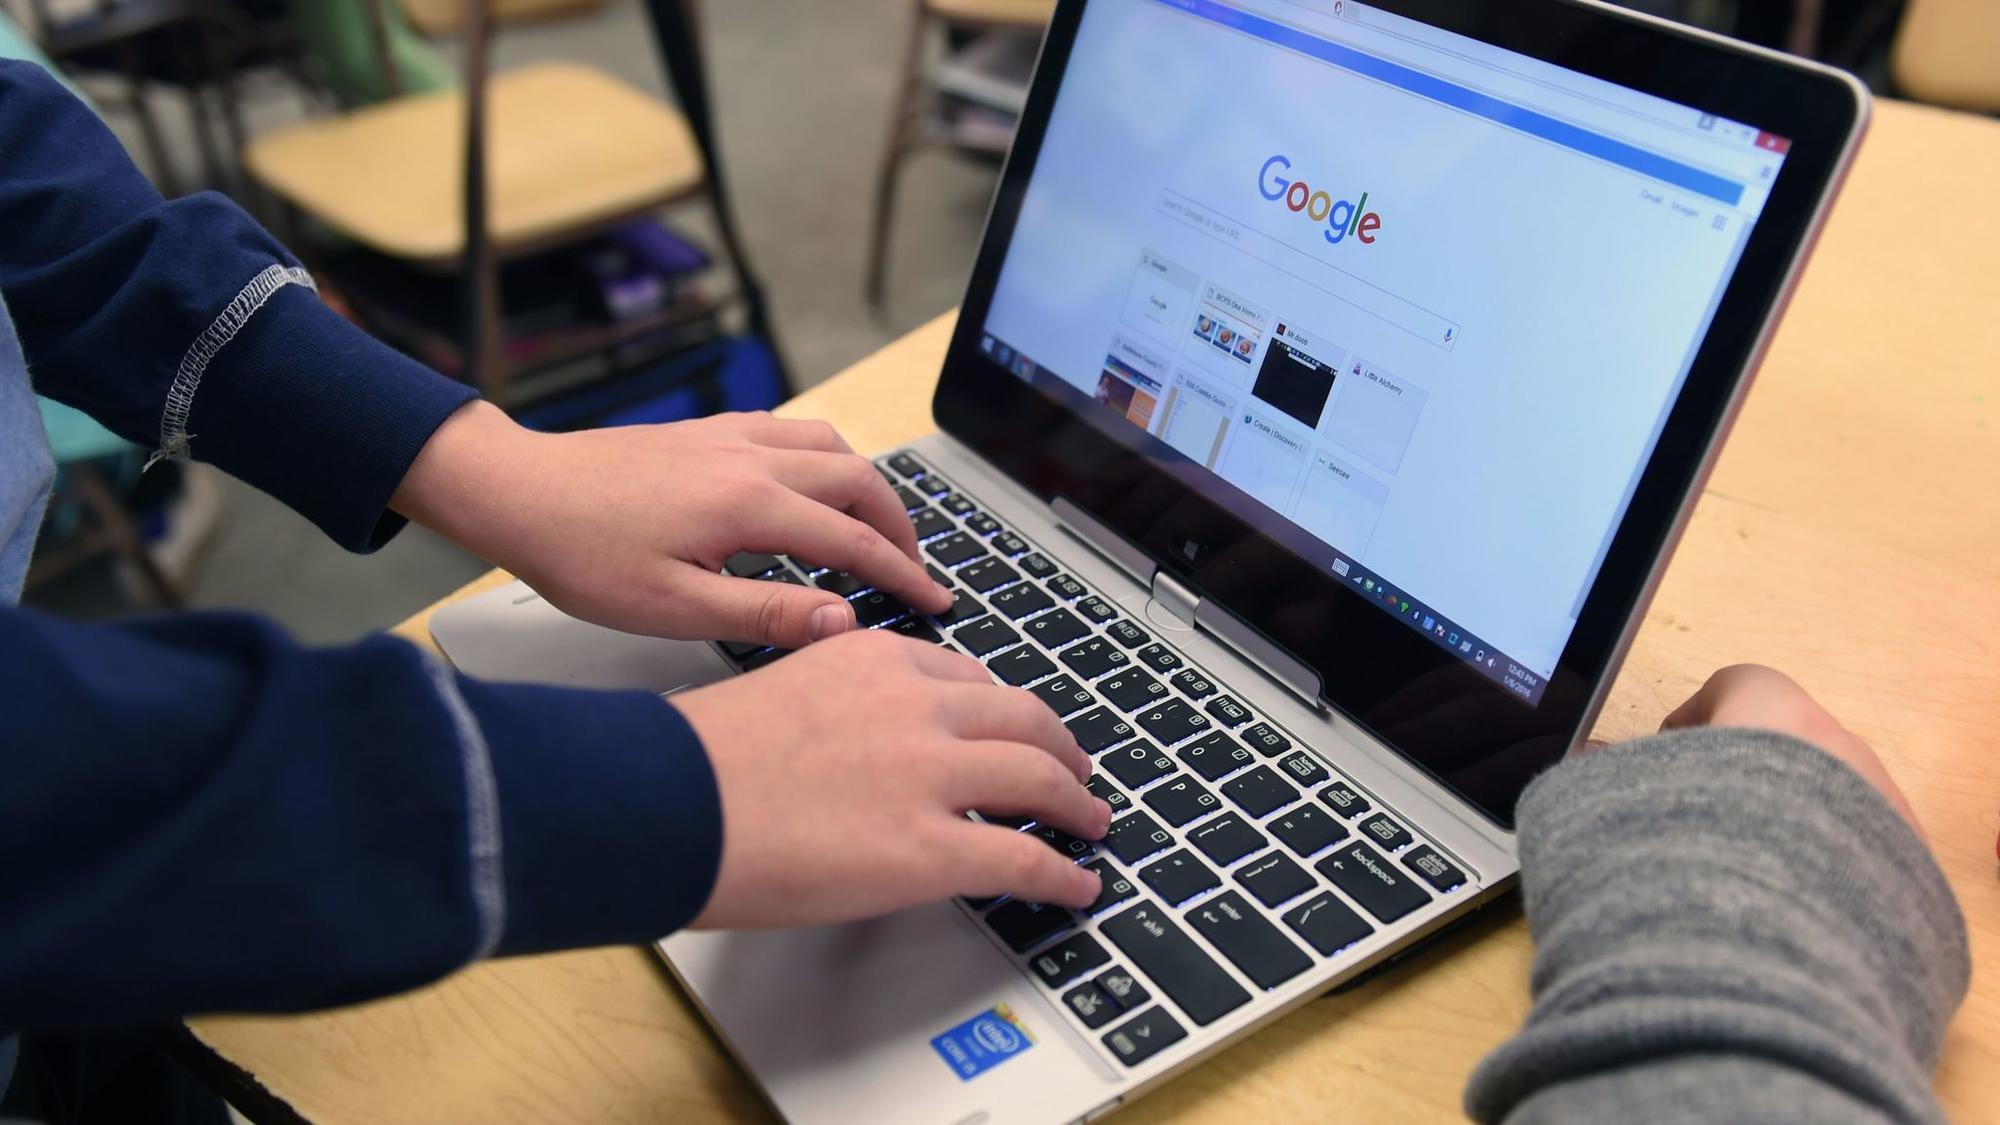 Worries intensify about student laptops as Baltimore County prepares to expand use of devices